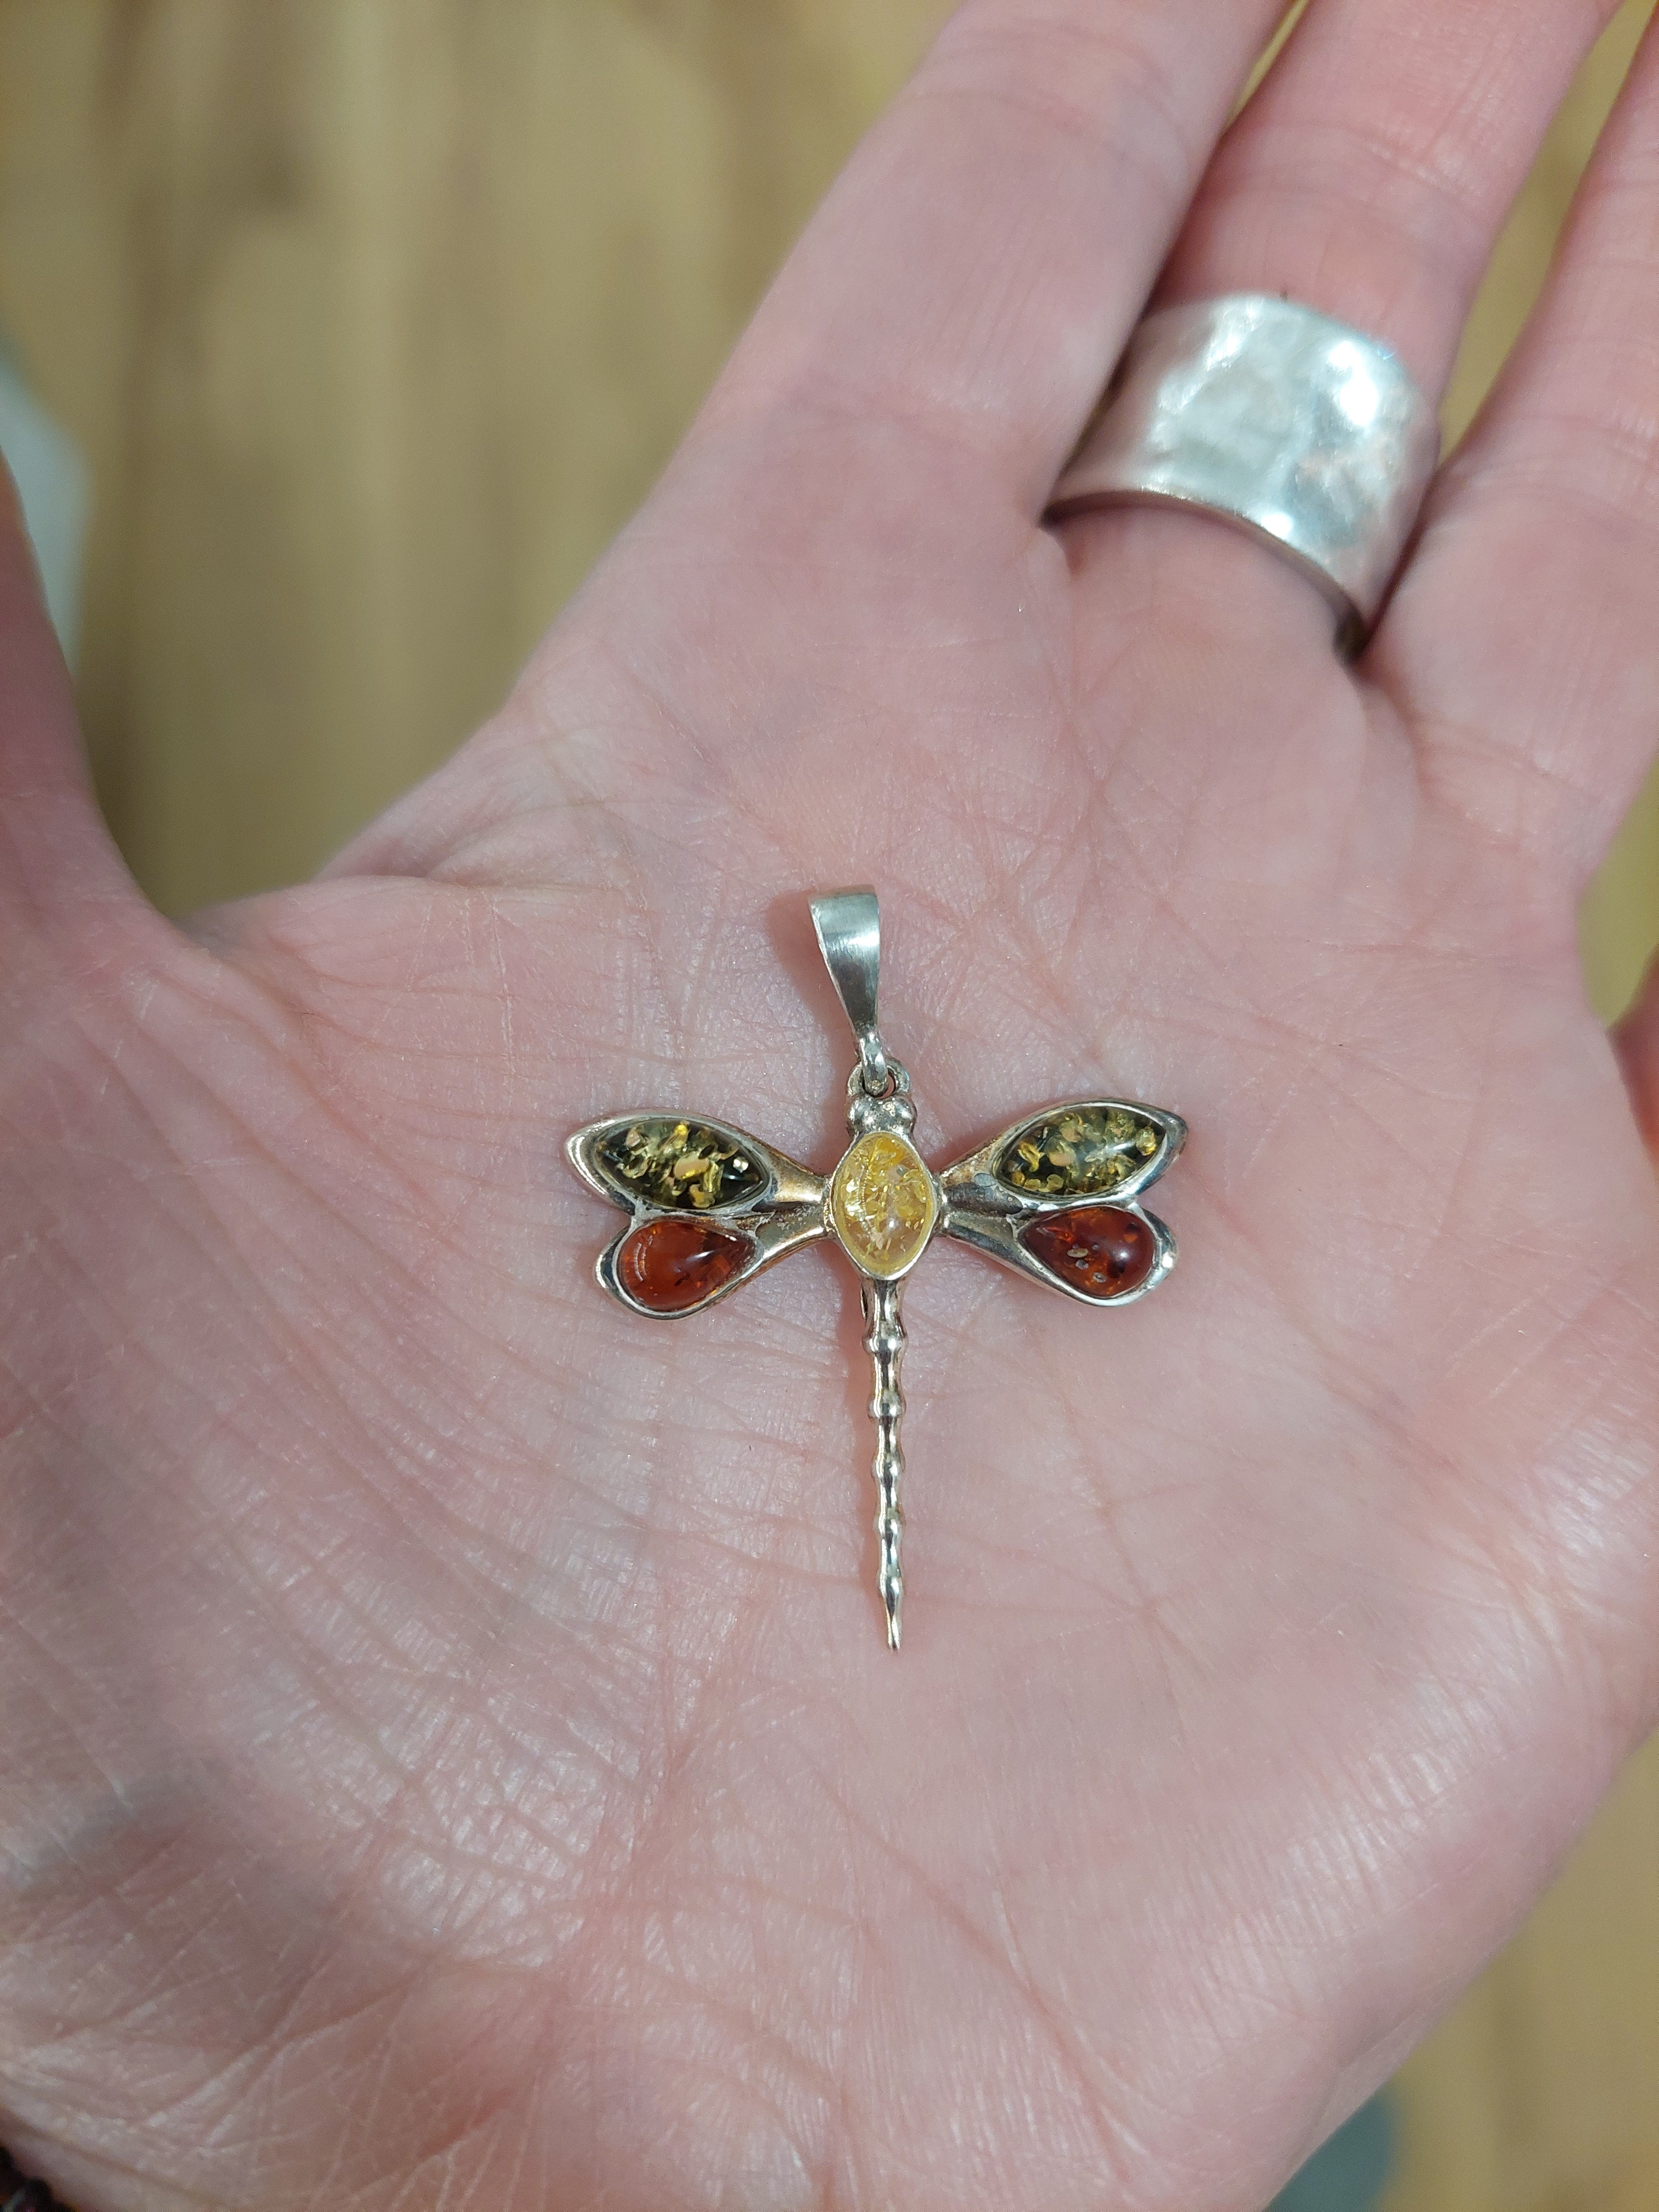 Amber Dragonfly Pendant - 925 Sterling Silver